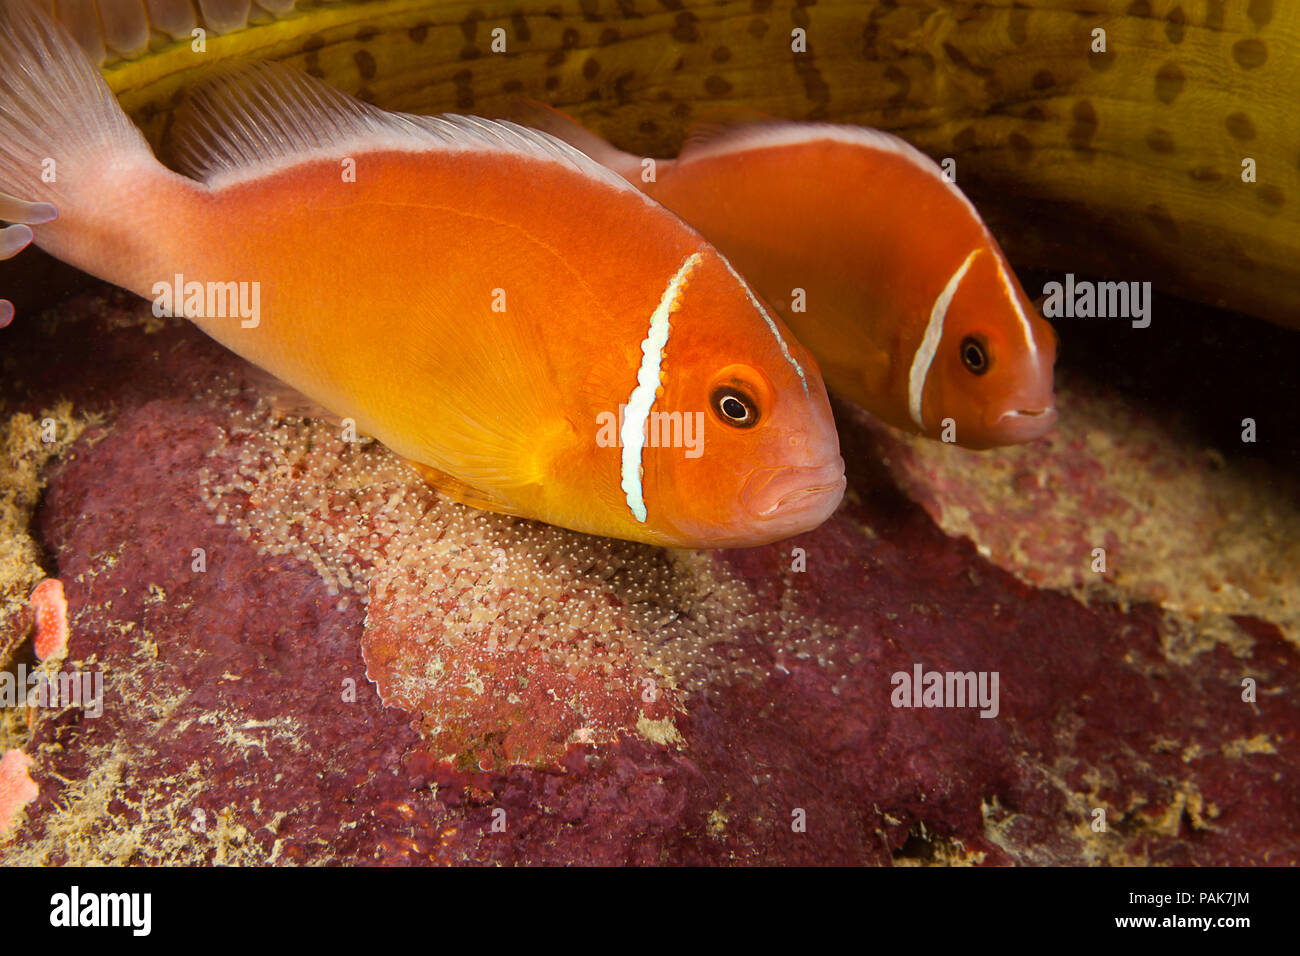 A pair of common anemonefish, Amphiprion perideraion, over their egg mass, at the base of the anemone, Heteractis magnifica, Yap, Micronesia. Stock Photo